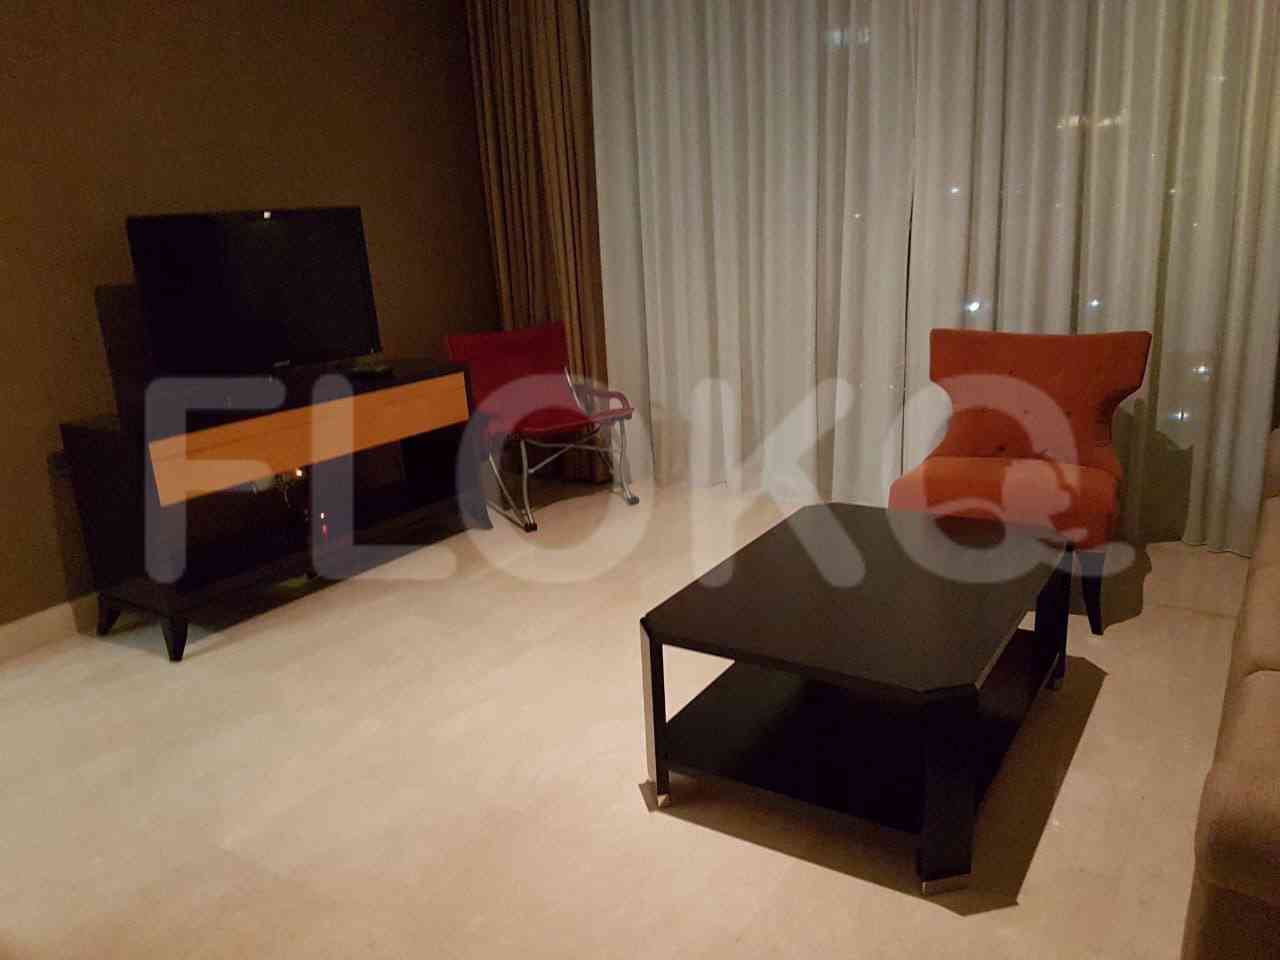 2 Bedroom on 15th Floor for Rent in Pakubuwono View - fga252 10